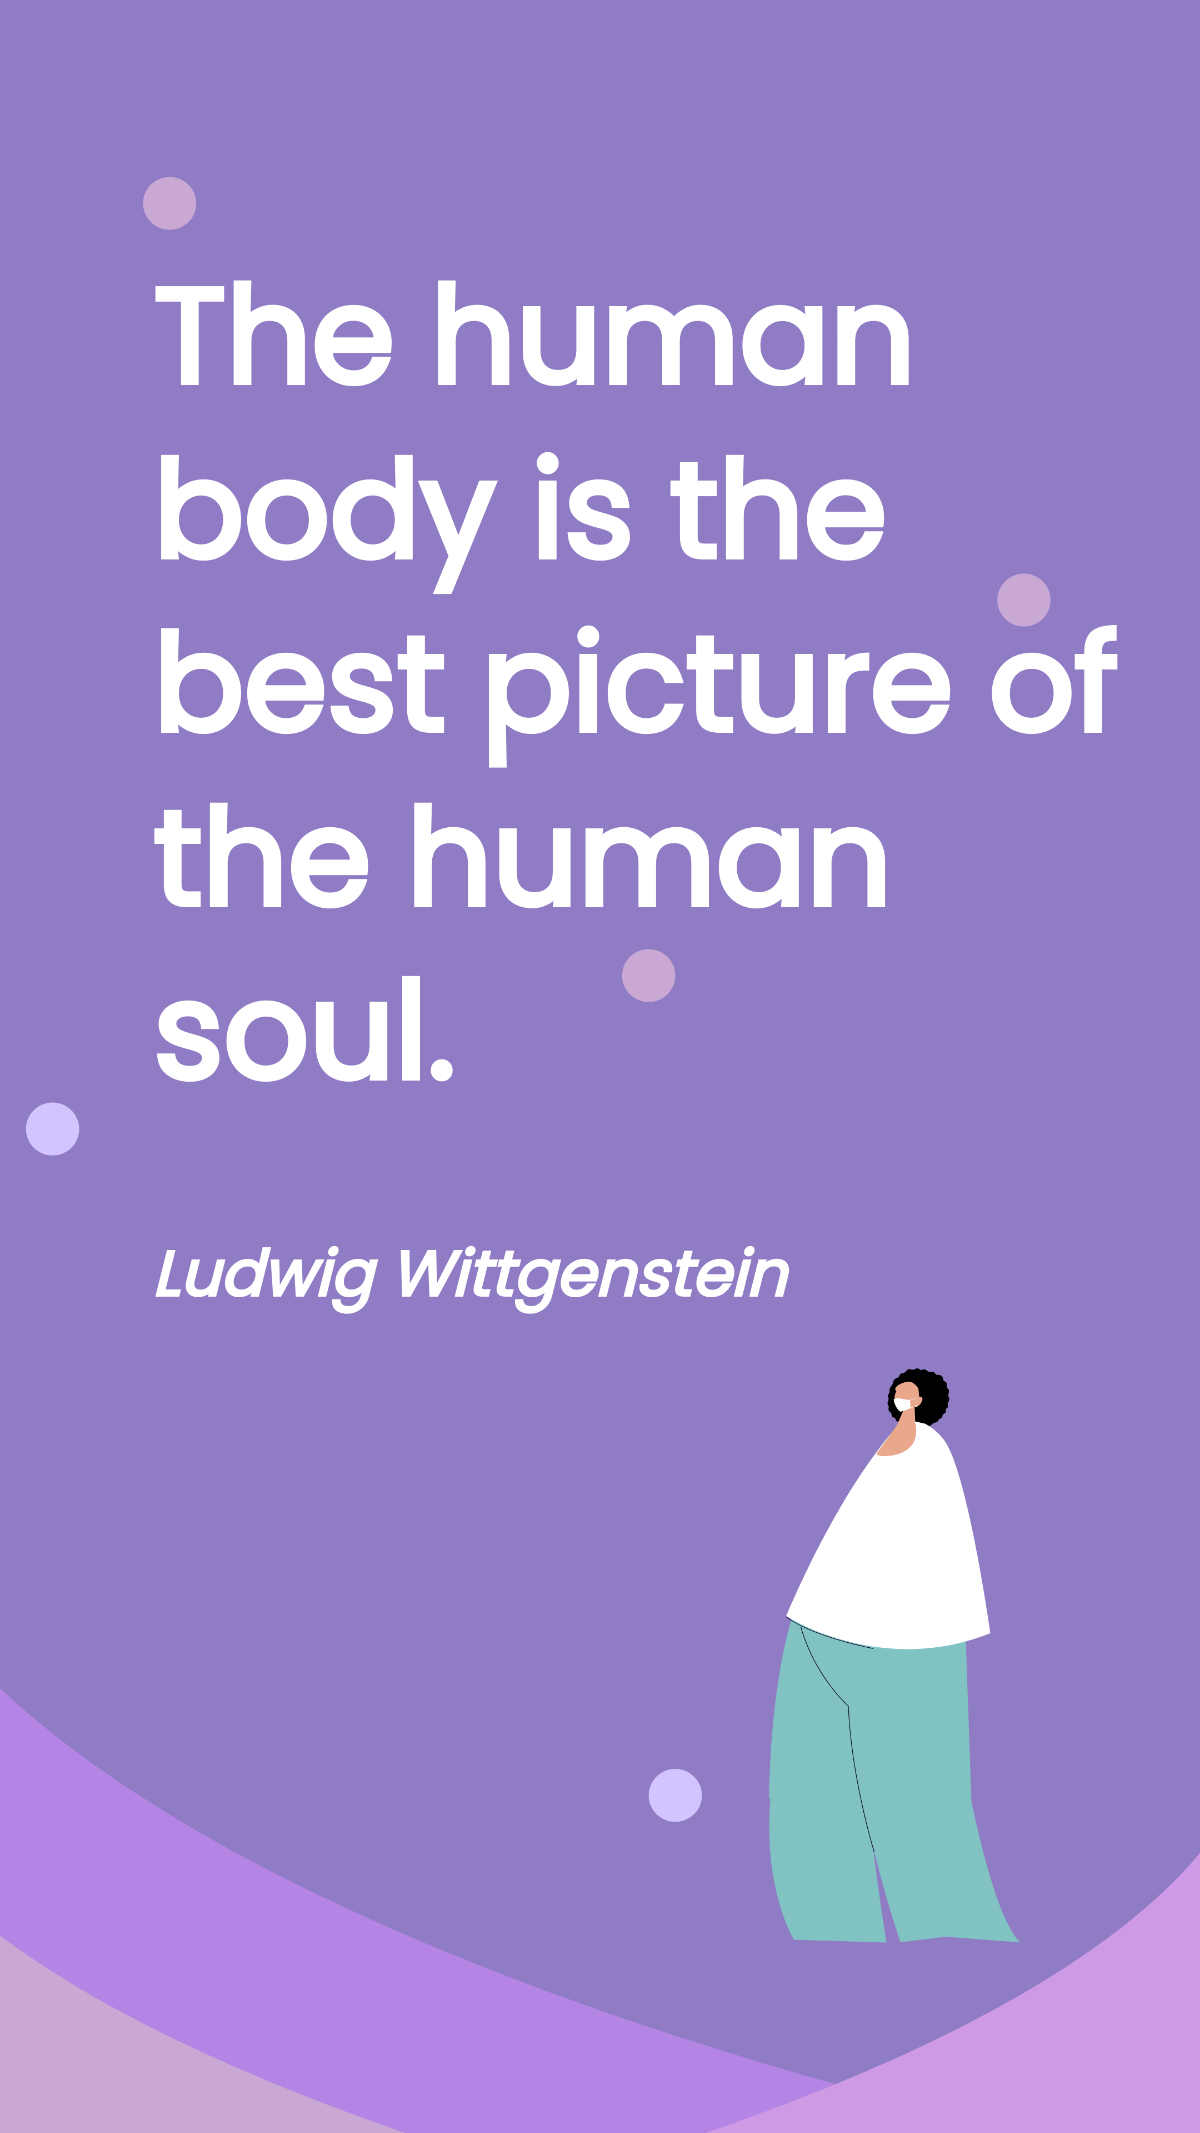 Ludwig Wittgenstein - The human body is the best picture of the human soul. Template